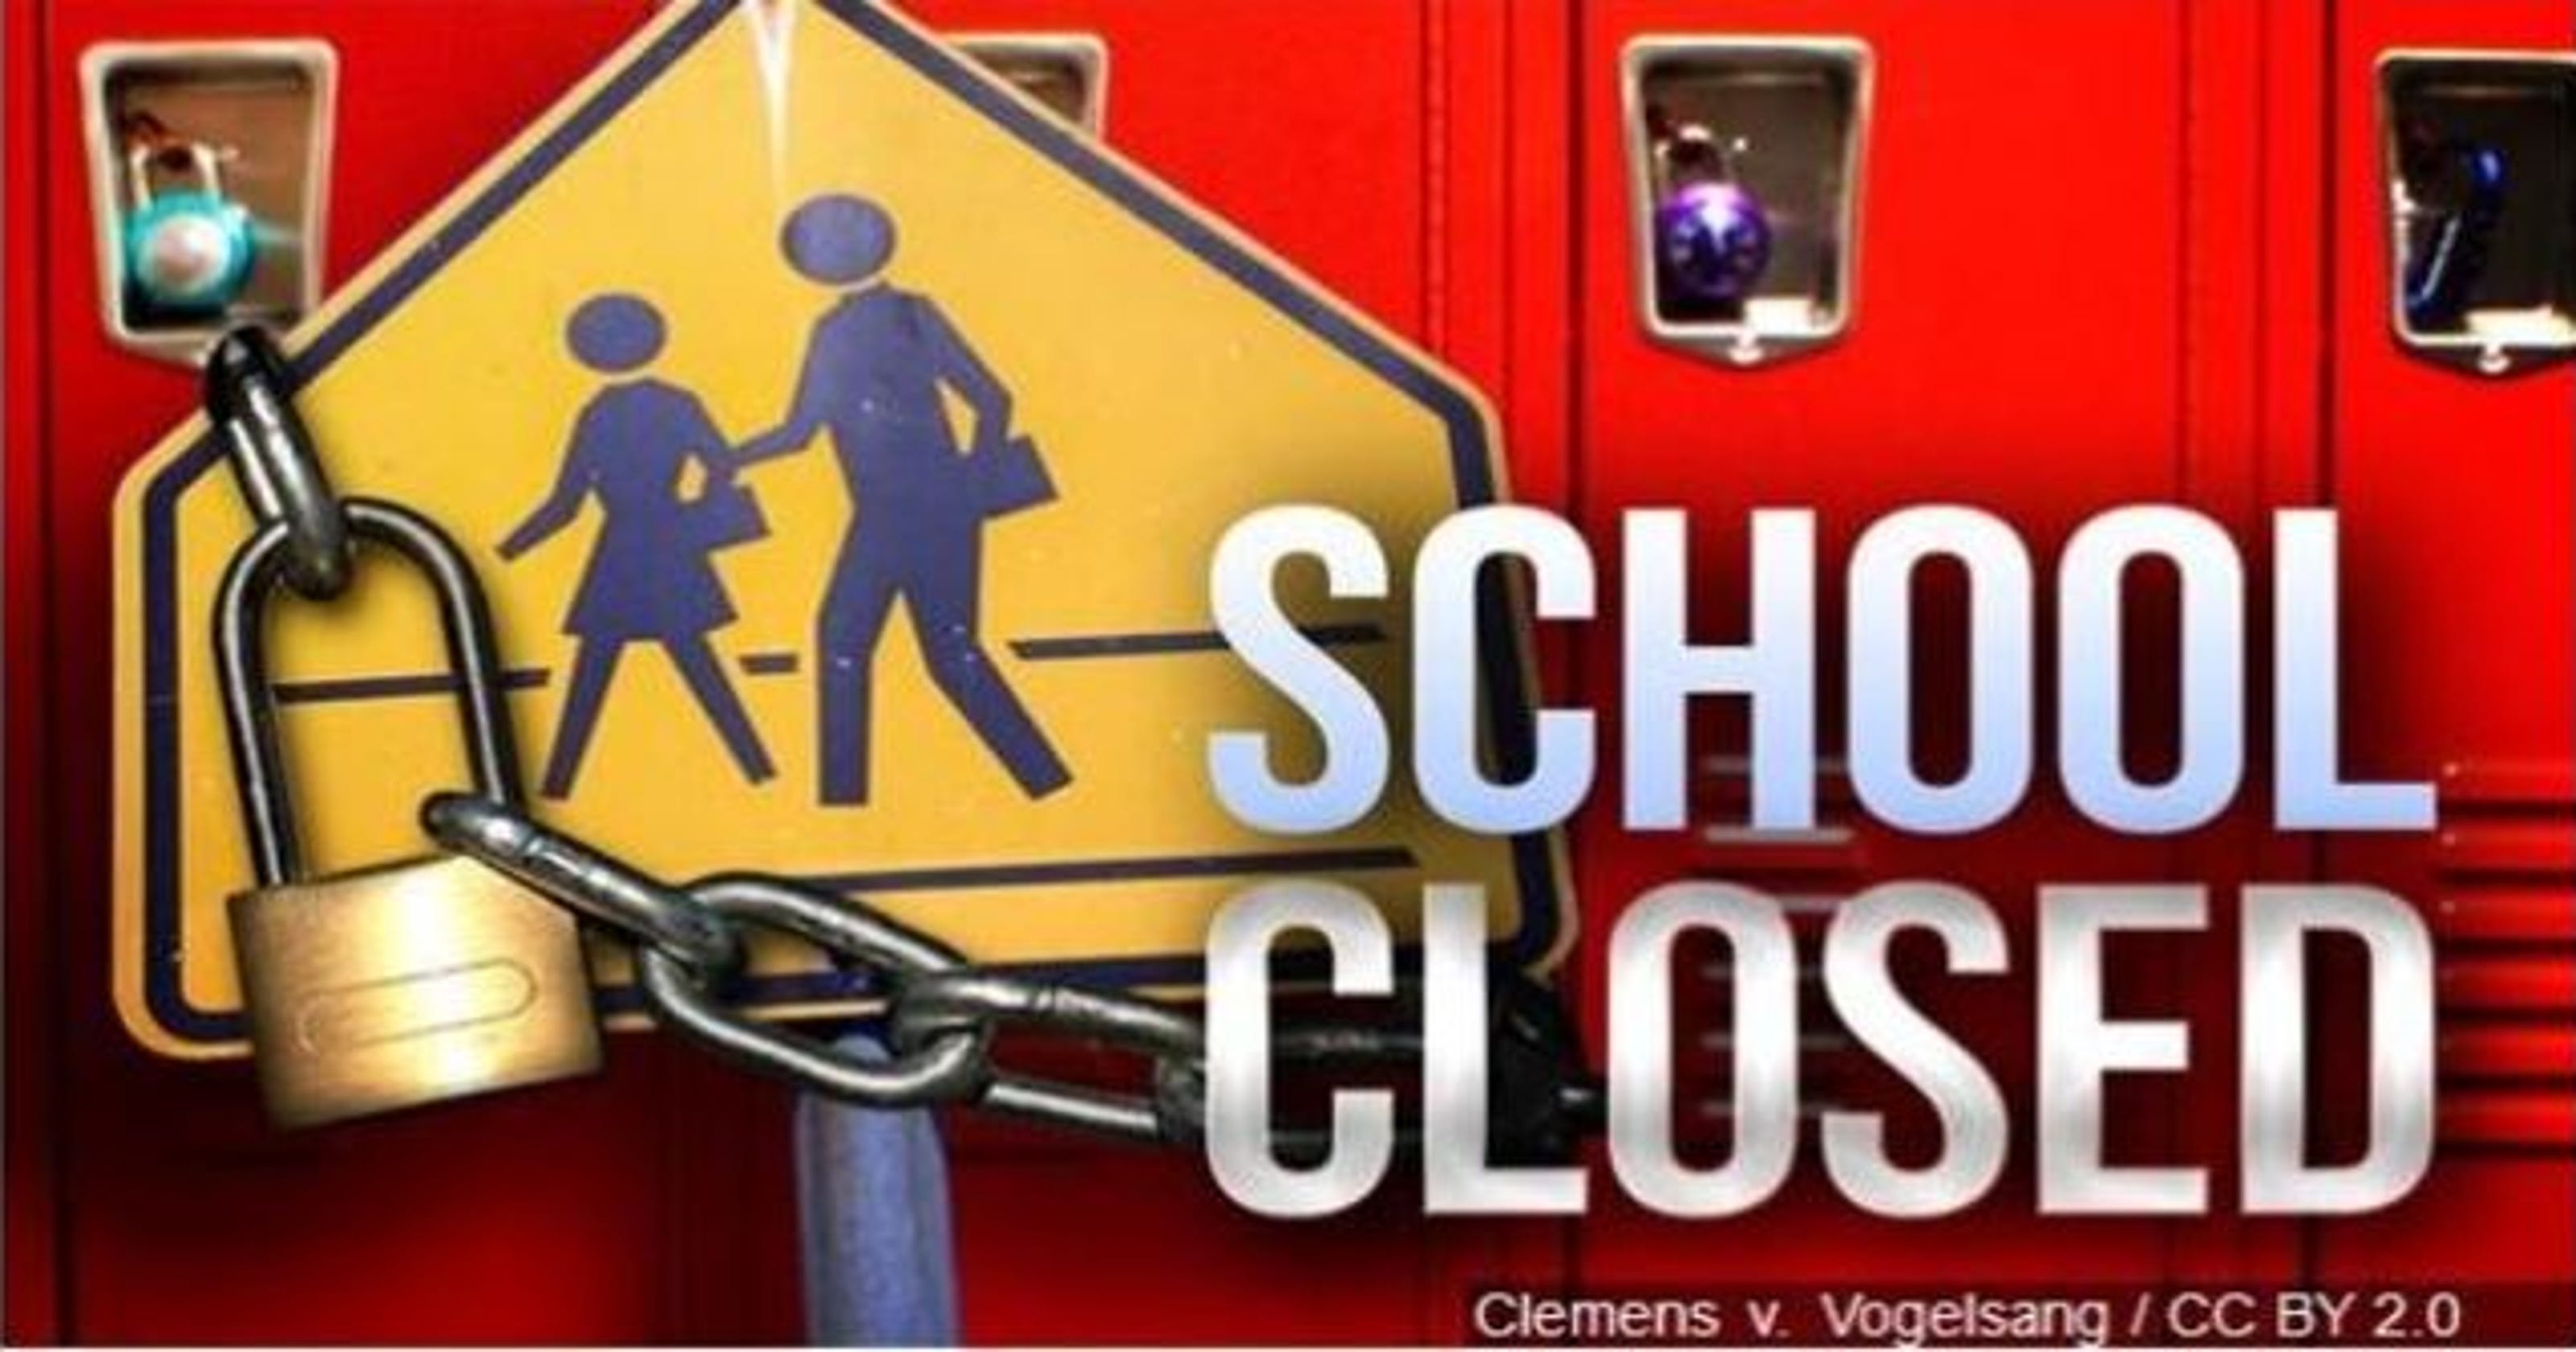 School closings for Thursday, August 30, 2017 due to Harvey